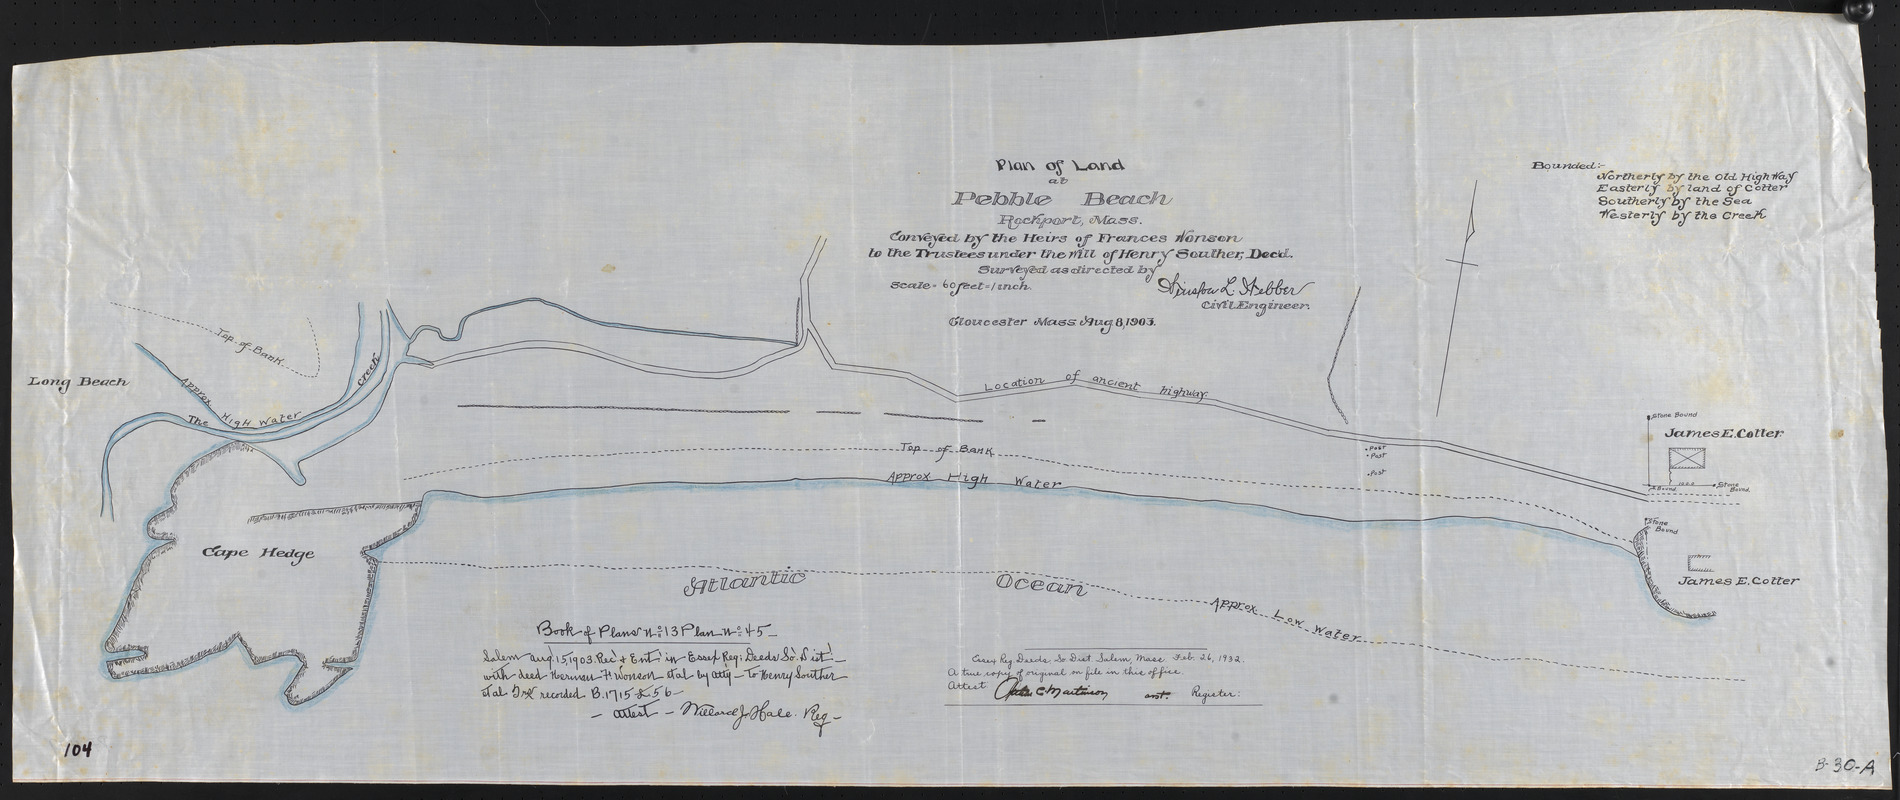 Plan of land at Pebble Beach, Rockport, Mass., conveyed by the heirs of Frances Wonson to the trustees under the will of Henry Souther, Decd.